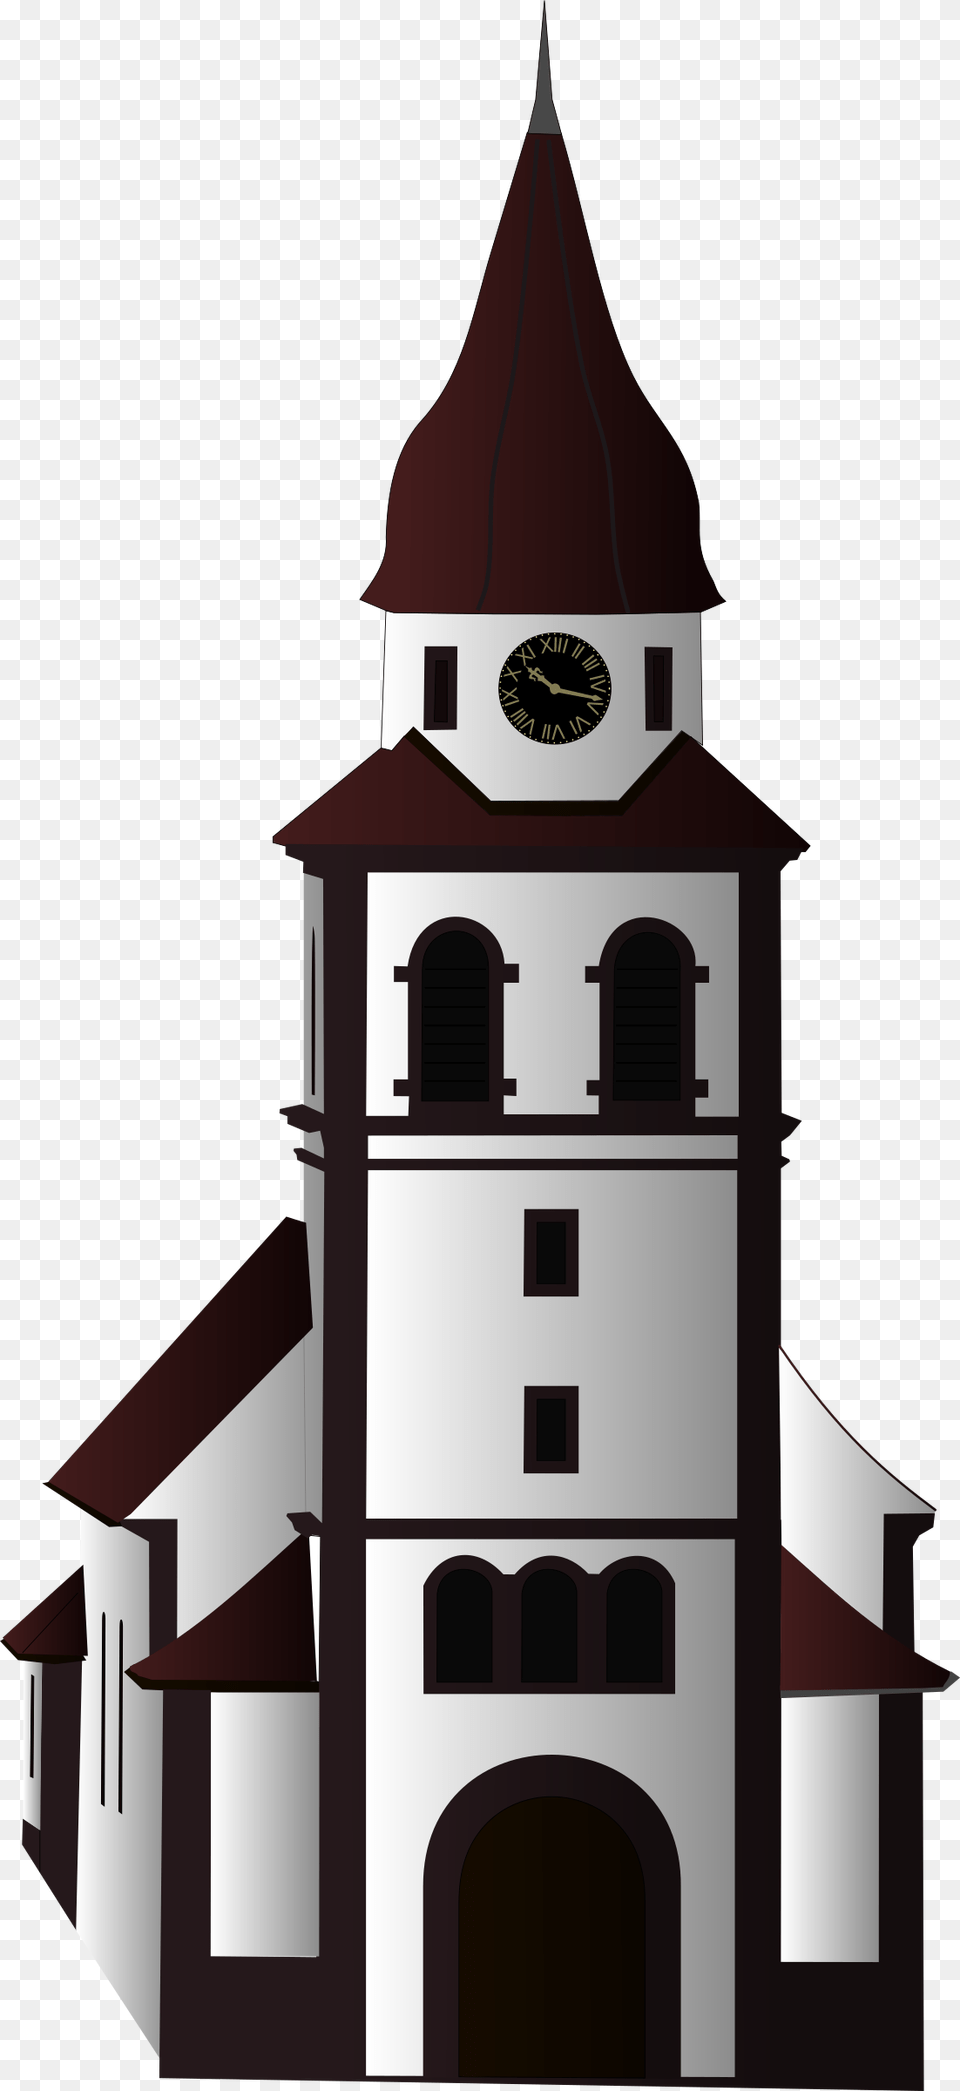 Photos V Church Tower, Architecture, Bell Tower, Building, Clock Tower Free Transparent Png